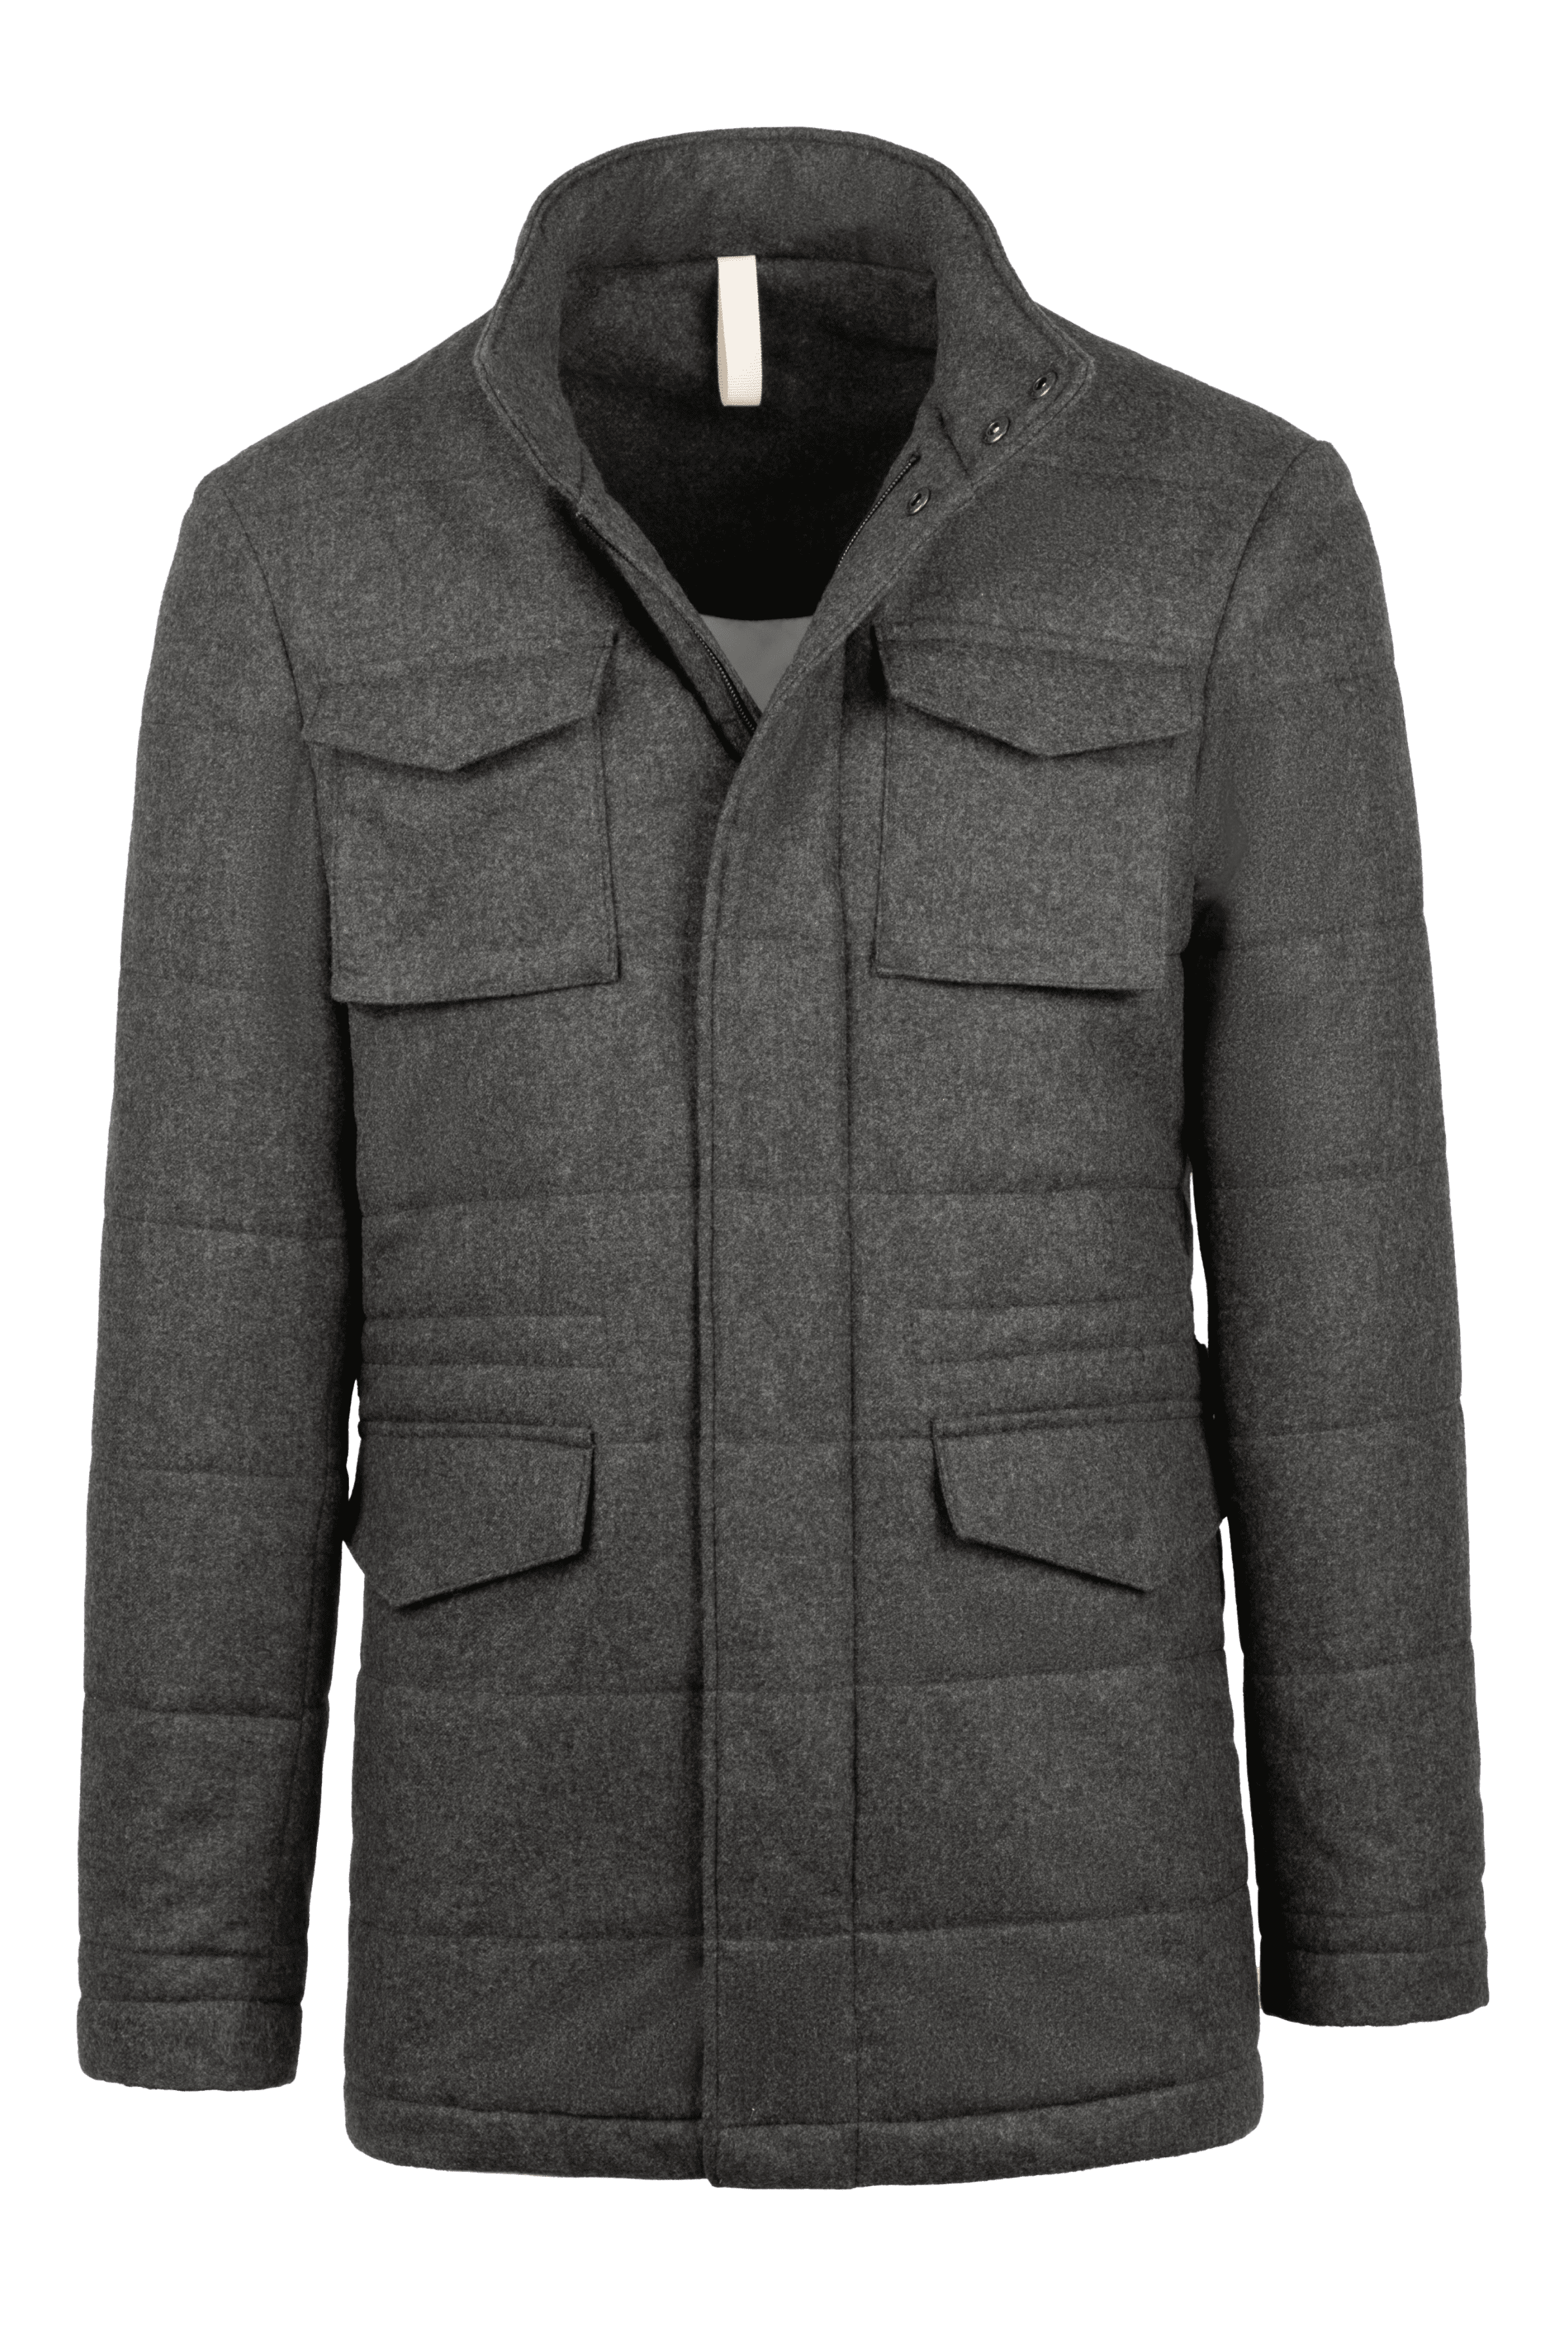 Knot Standard Uniform Green Quilted Field Jacket by Knot Standard